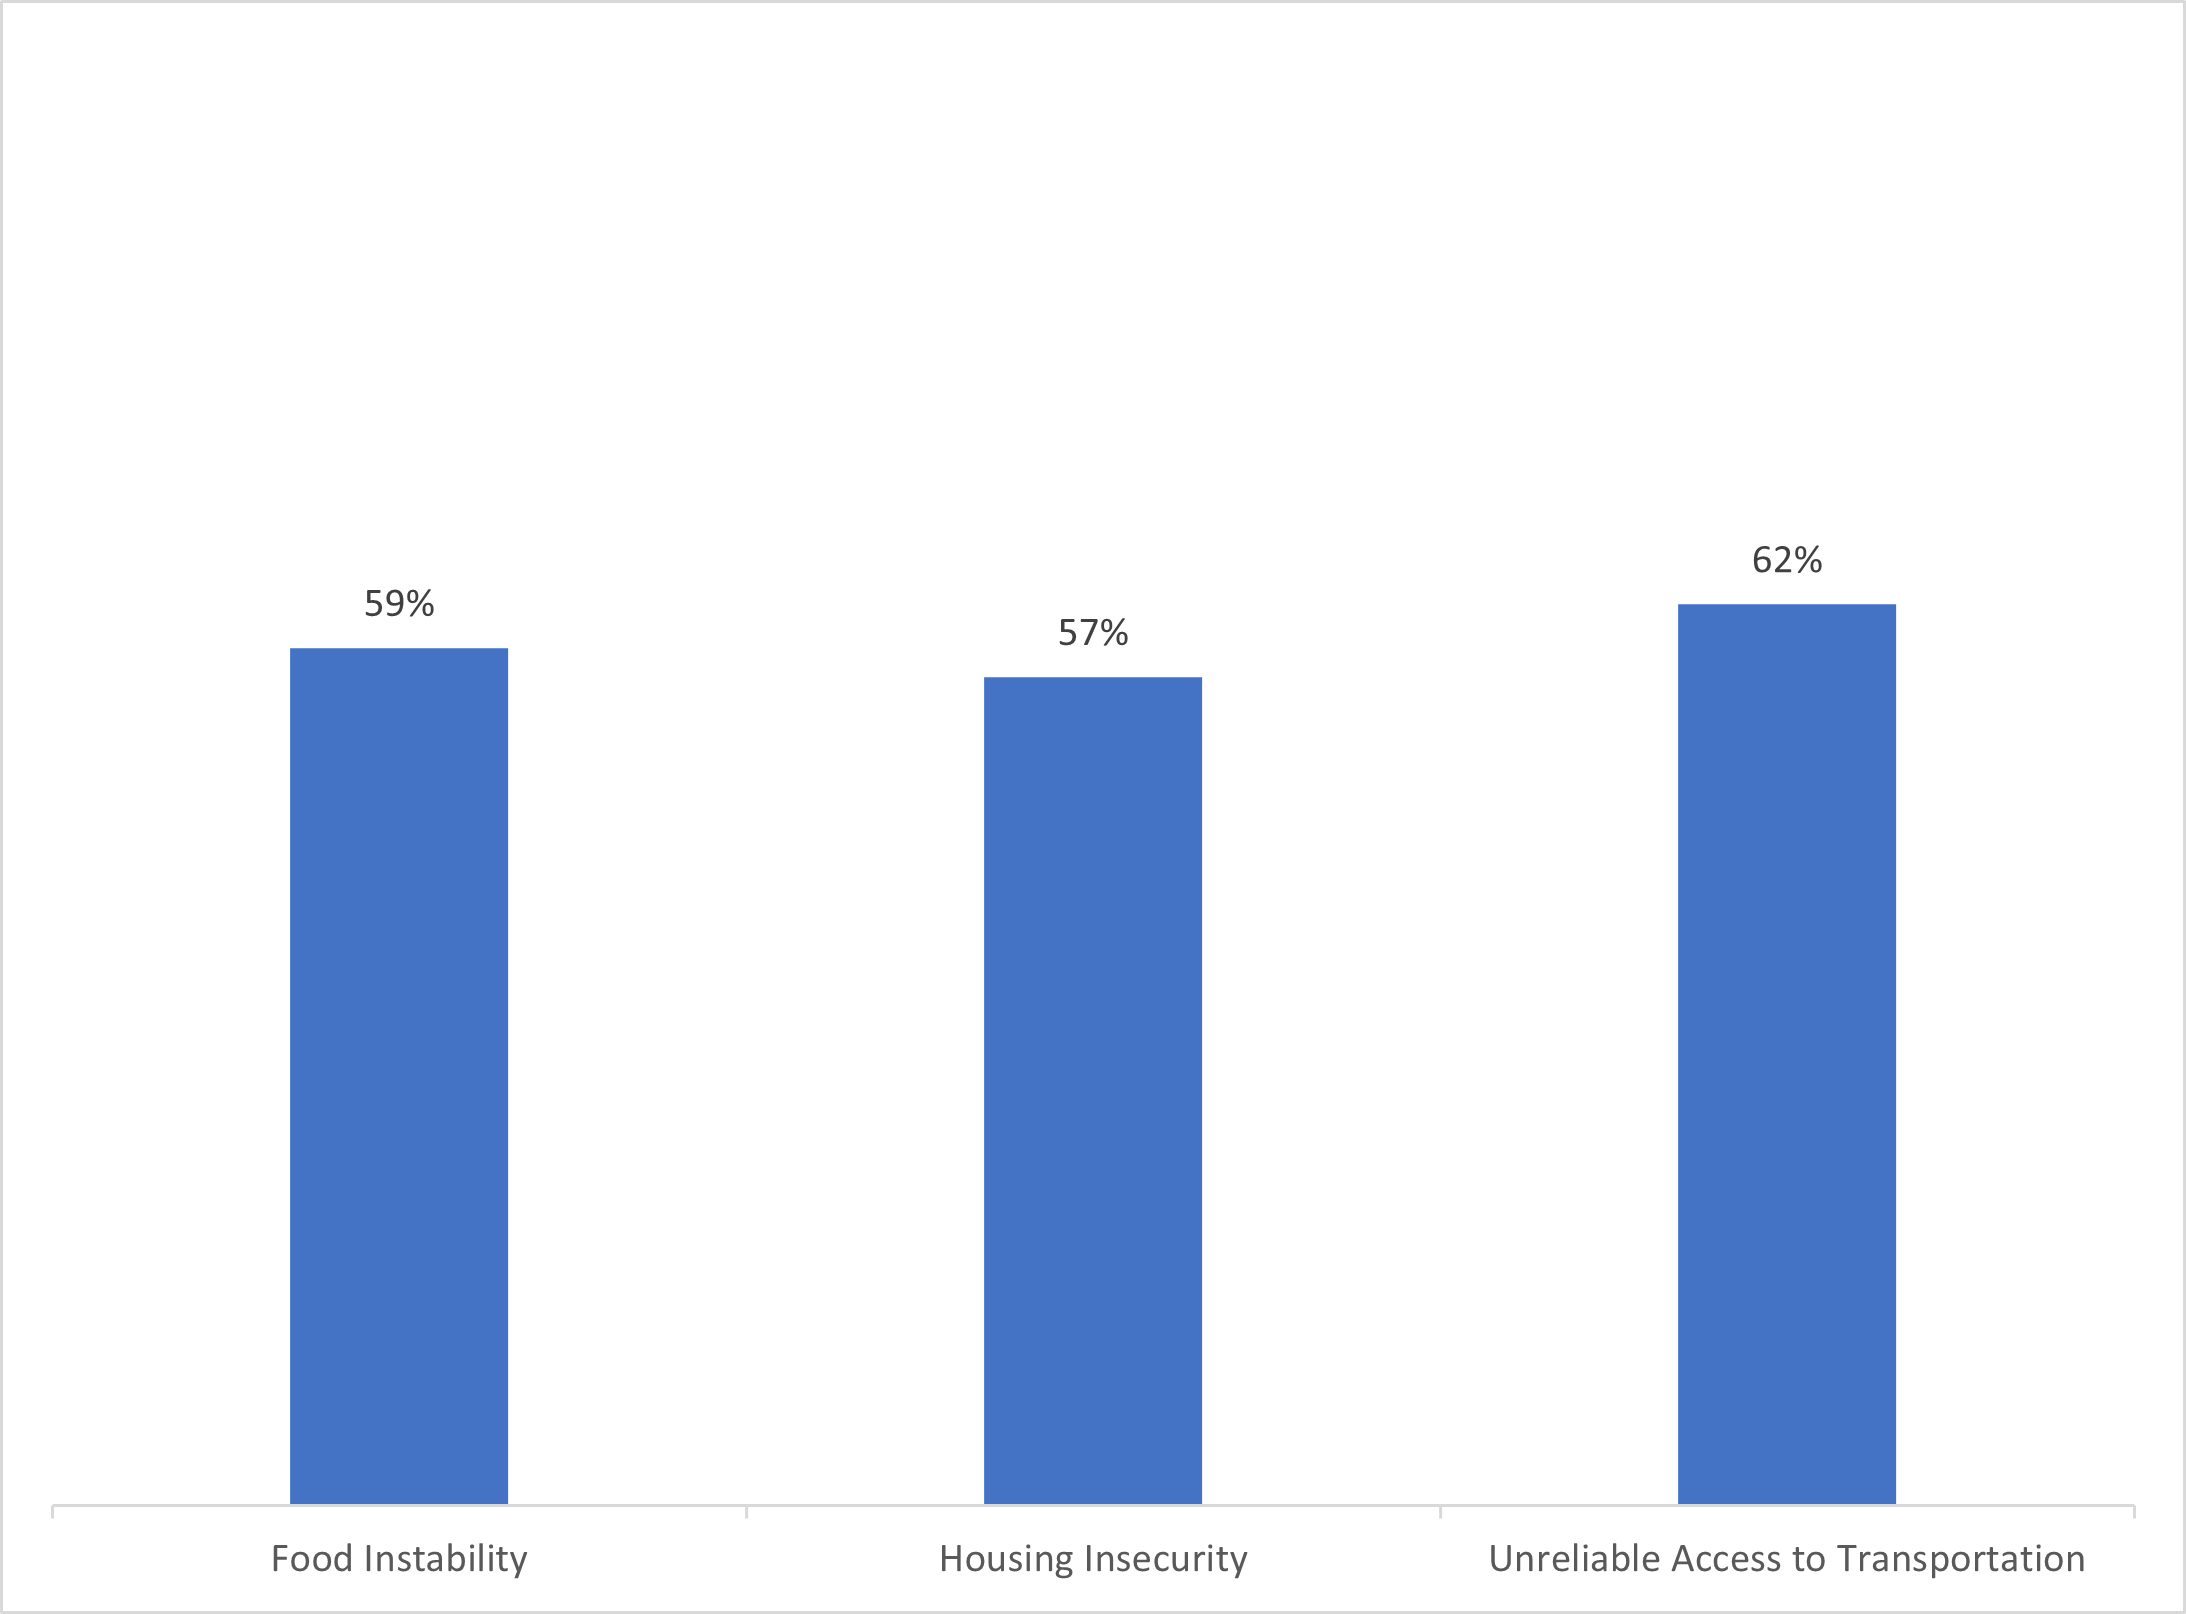 This figure contains a vertical bar chart that displays the proportion of US individuals that would be either very or somewhat comfortable with providers sharing their social needs data (were they to experience a need) for each of three social need types: 1) food insecurity, 2) housing instability, and 3) lack of reliable transportation. The bar chart shows that 59% of patients would be comfortable with providers sharing their food needs, 57% would be comfortable with providers sharing their housing needs, and 62% would be comfortable with providers sharing their transportation needs.